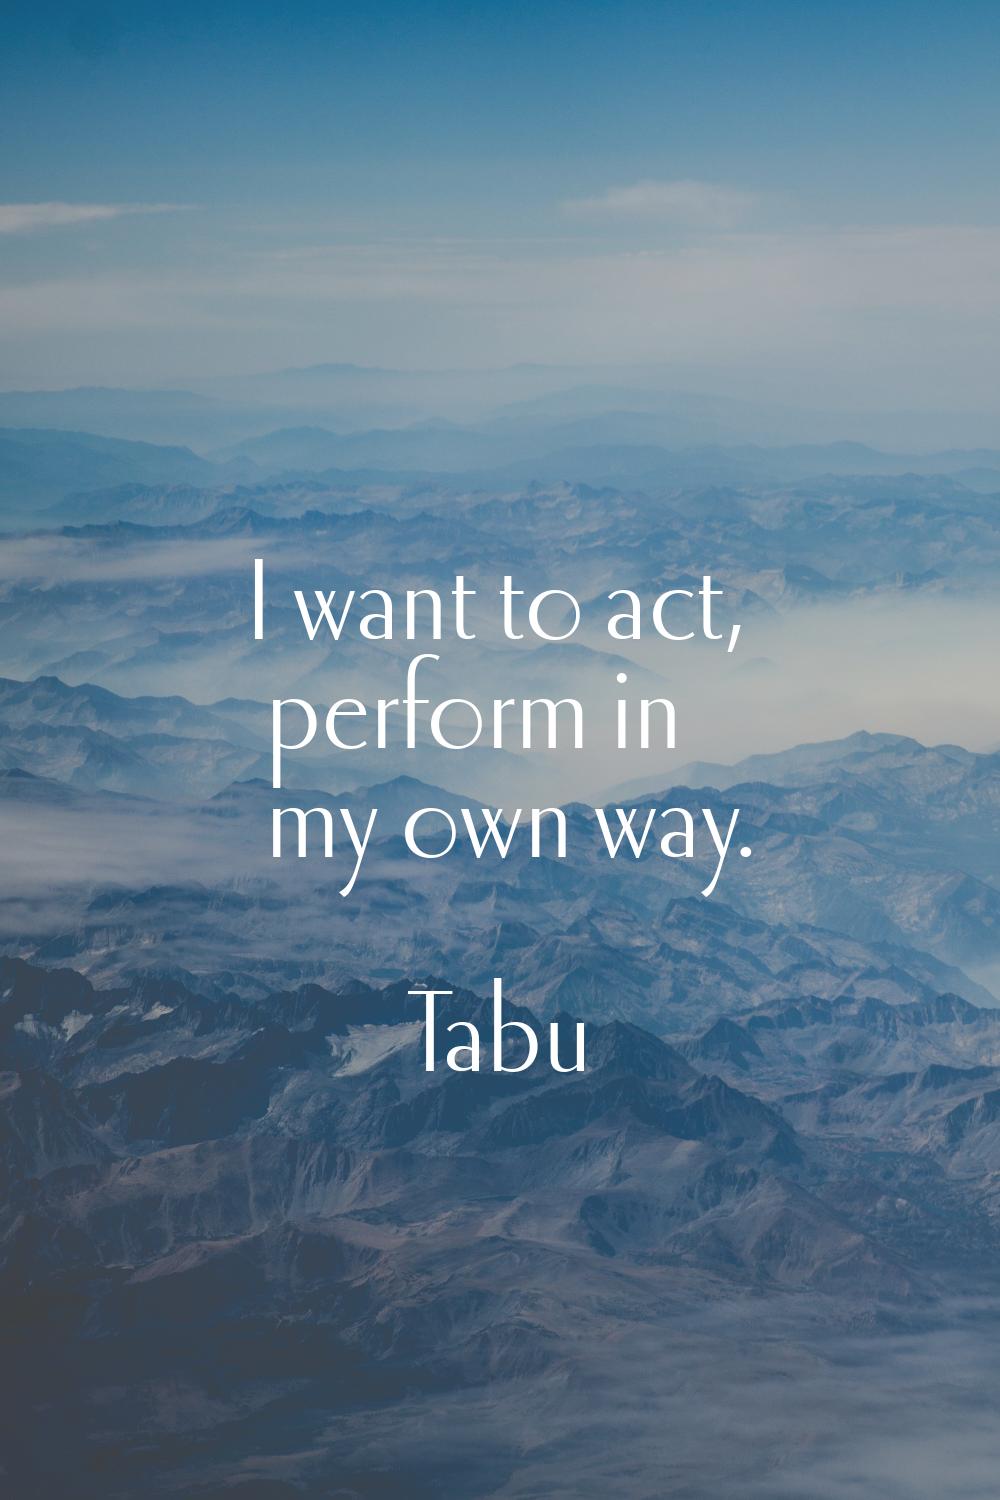 I want to act, perform in my own way.